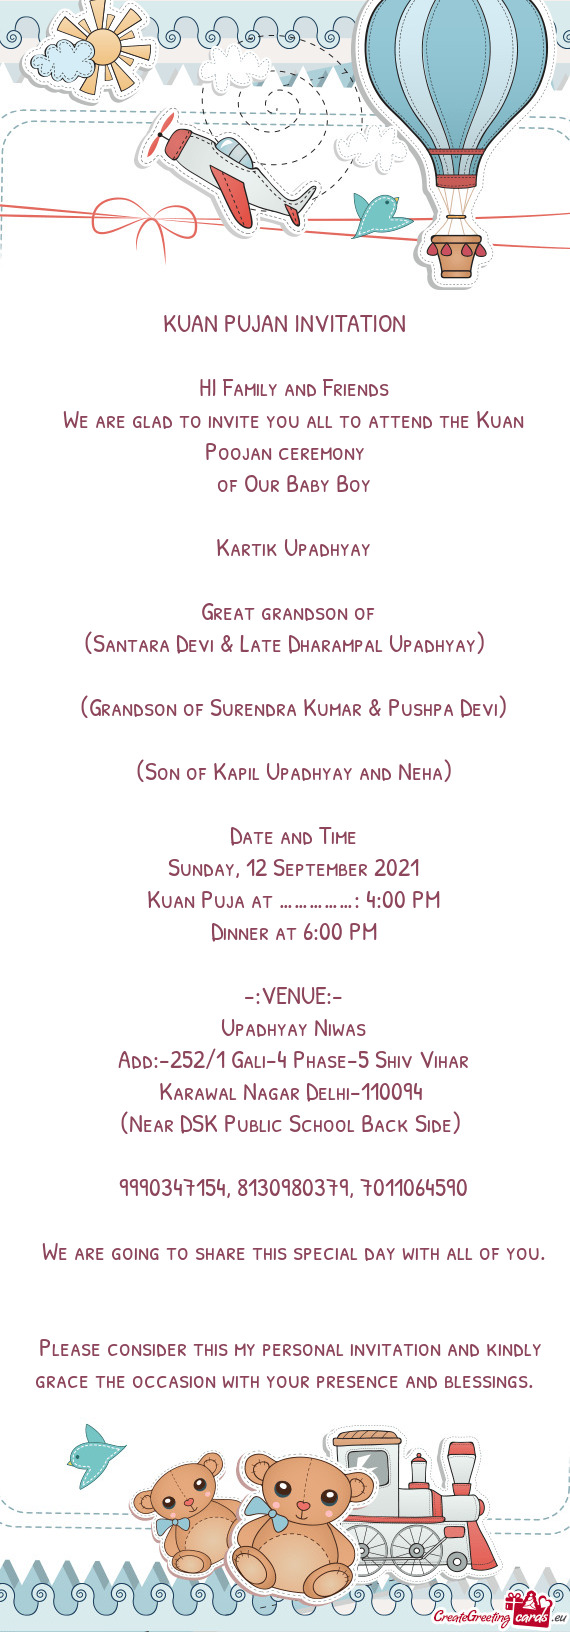 We are glad to invite you all to attend the Kuan Poojan ceremony